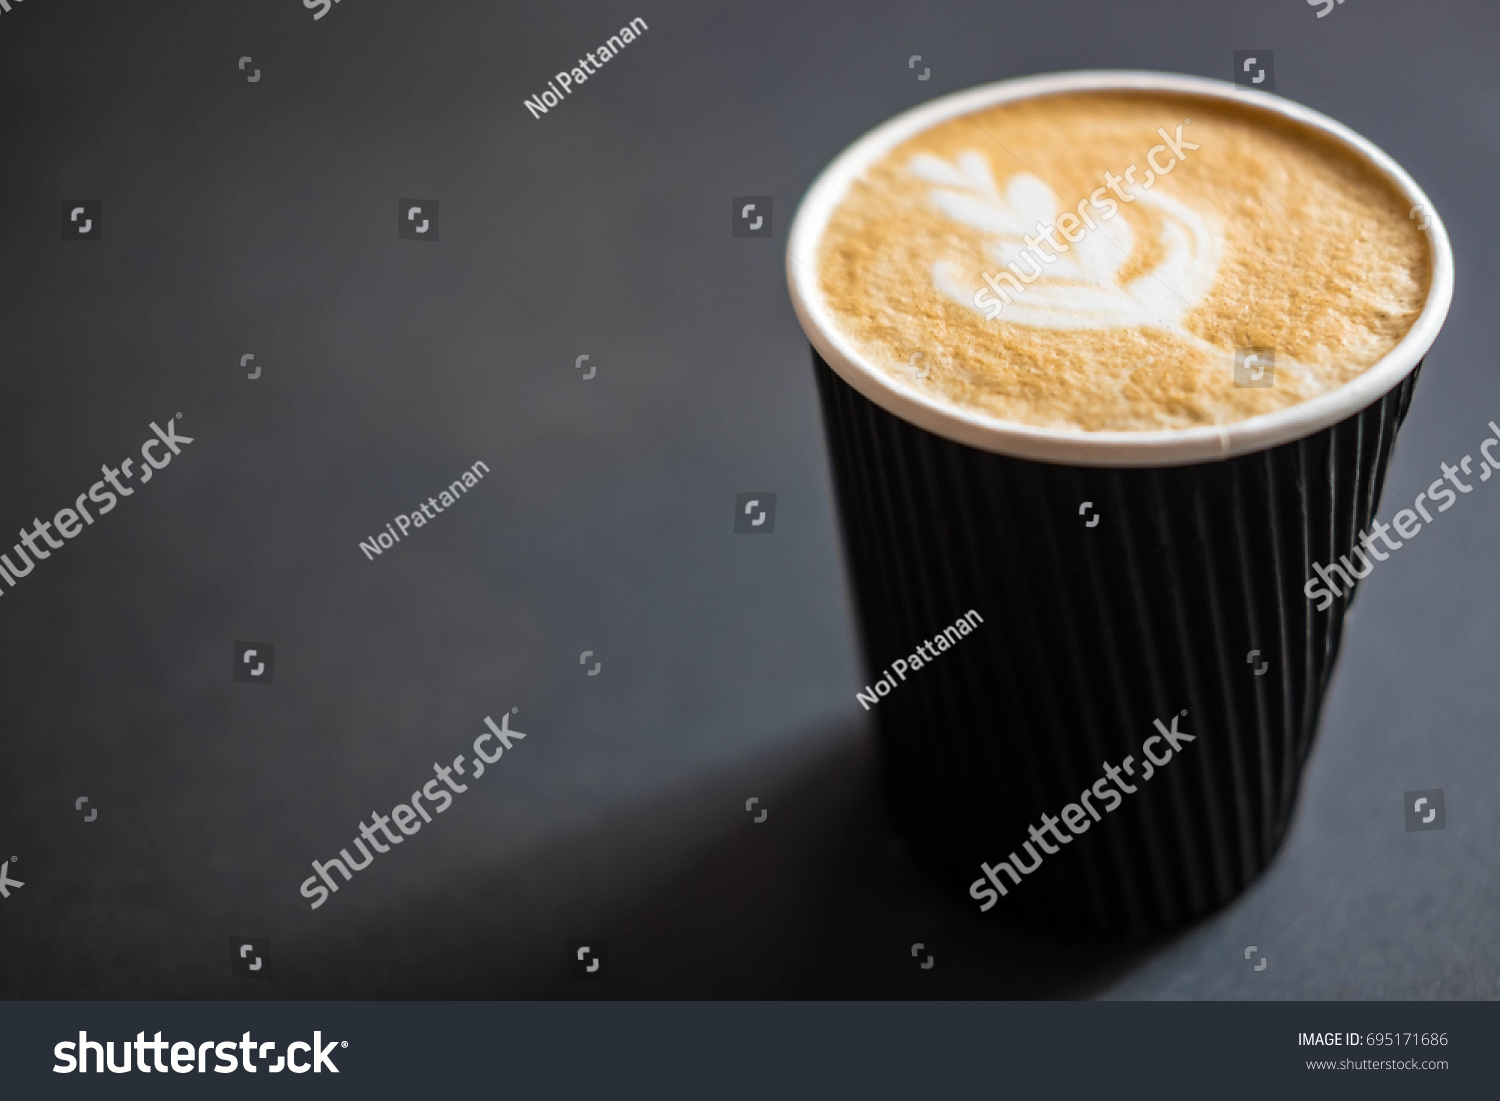 Soft focus of Latte art hot coffee in black paper cup on gray background with shadow , blurred and soft focus image #695171686